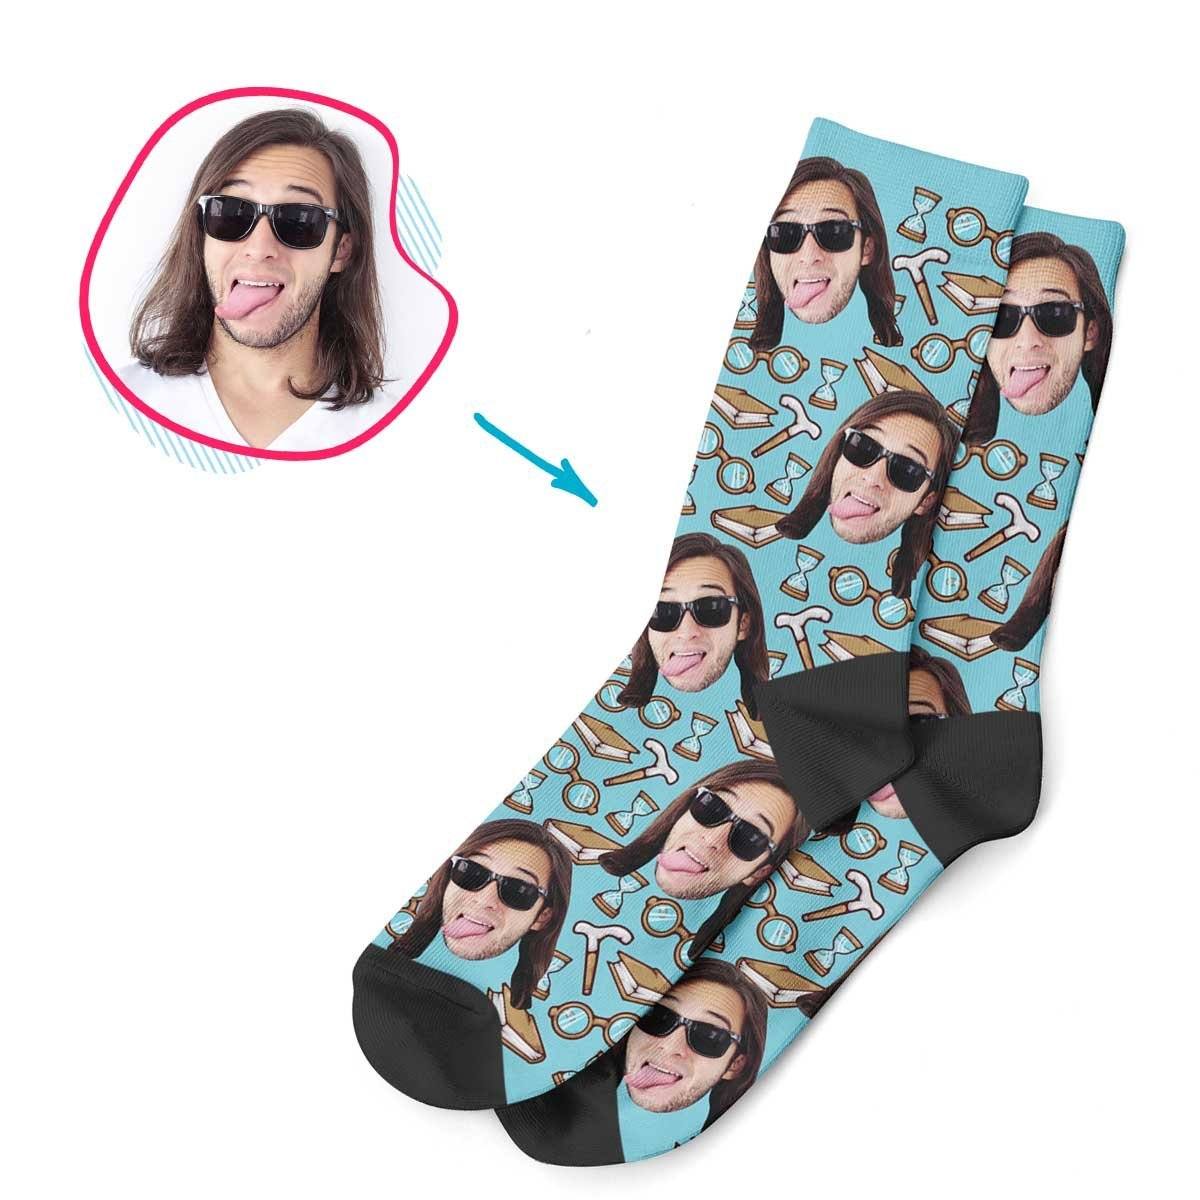 Blue Retirement personalized socks with photo of face printed on them